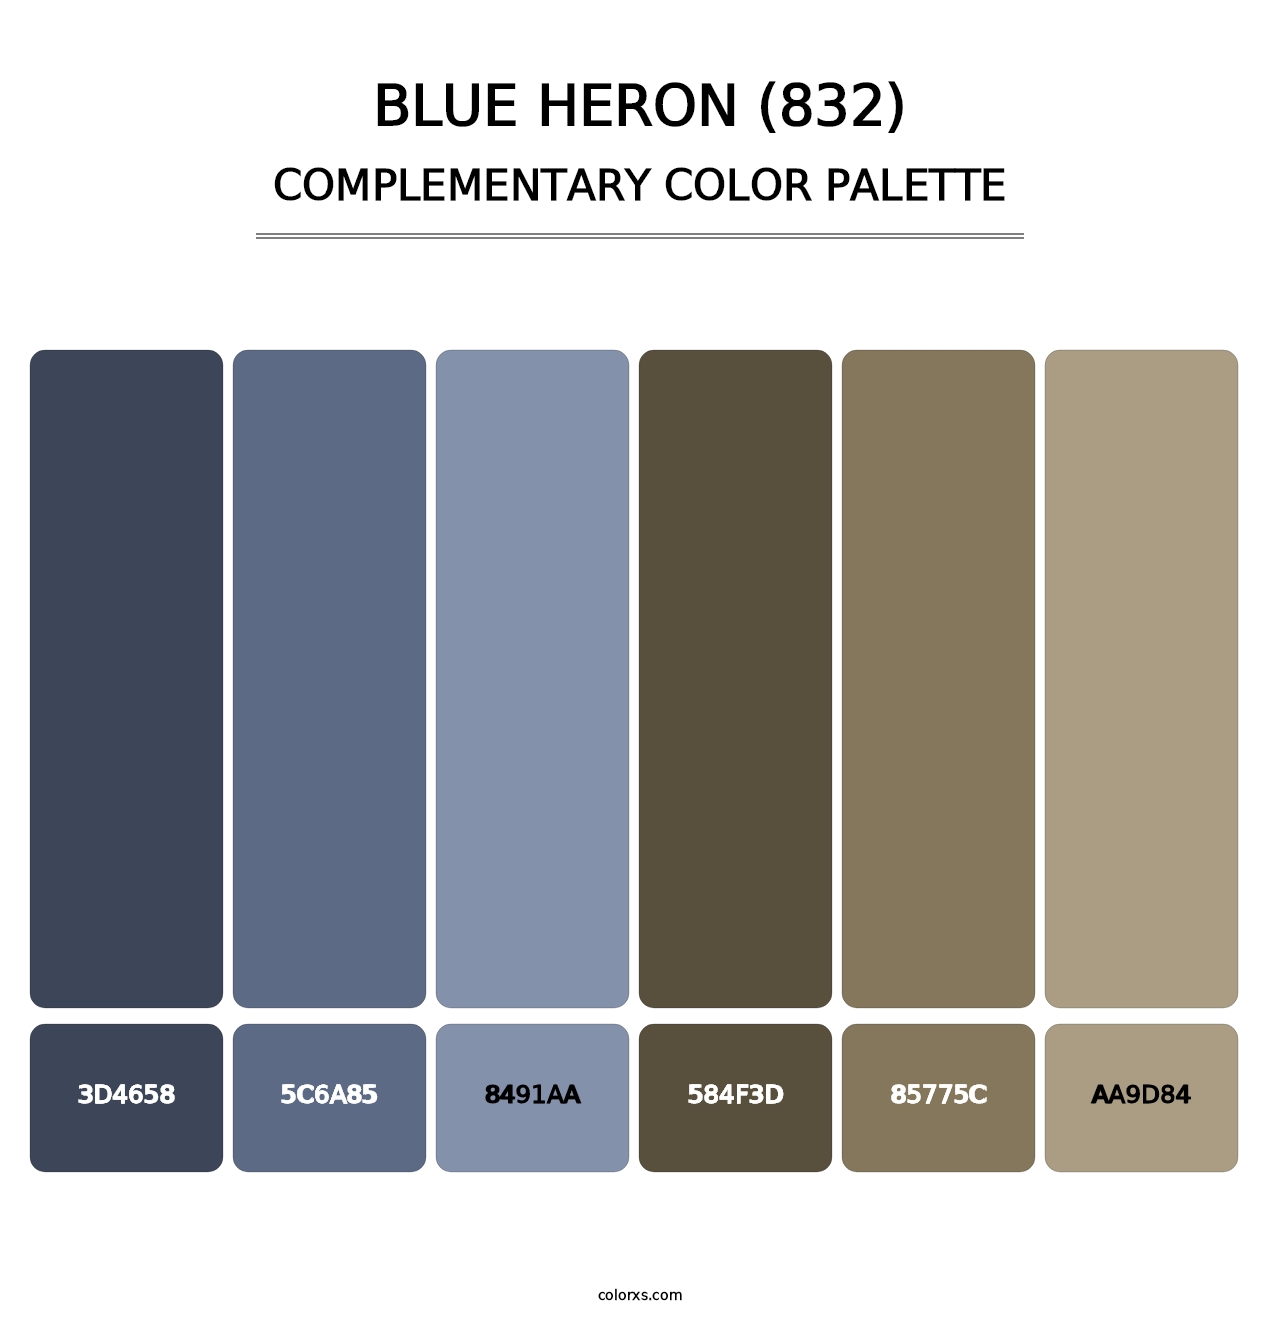 Blue Heron (832) - Complementary Color Palette